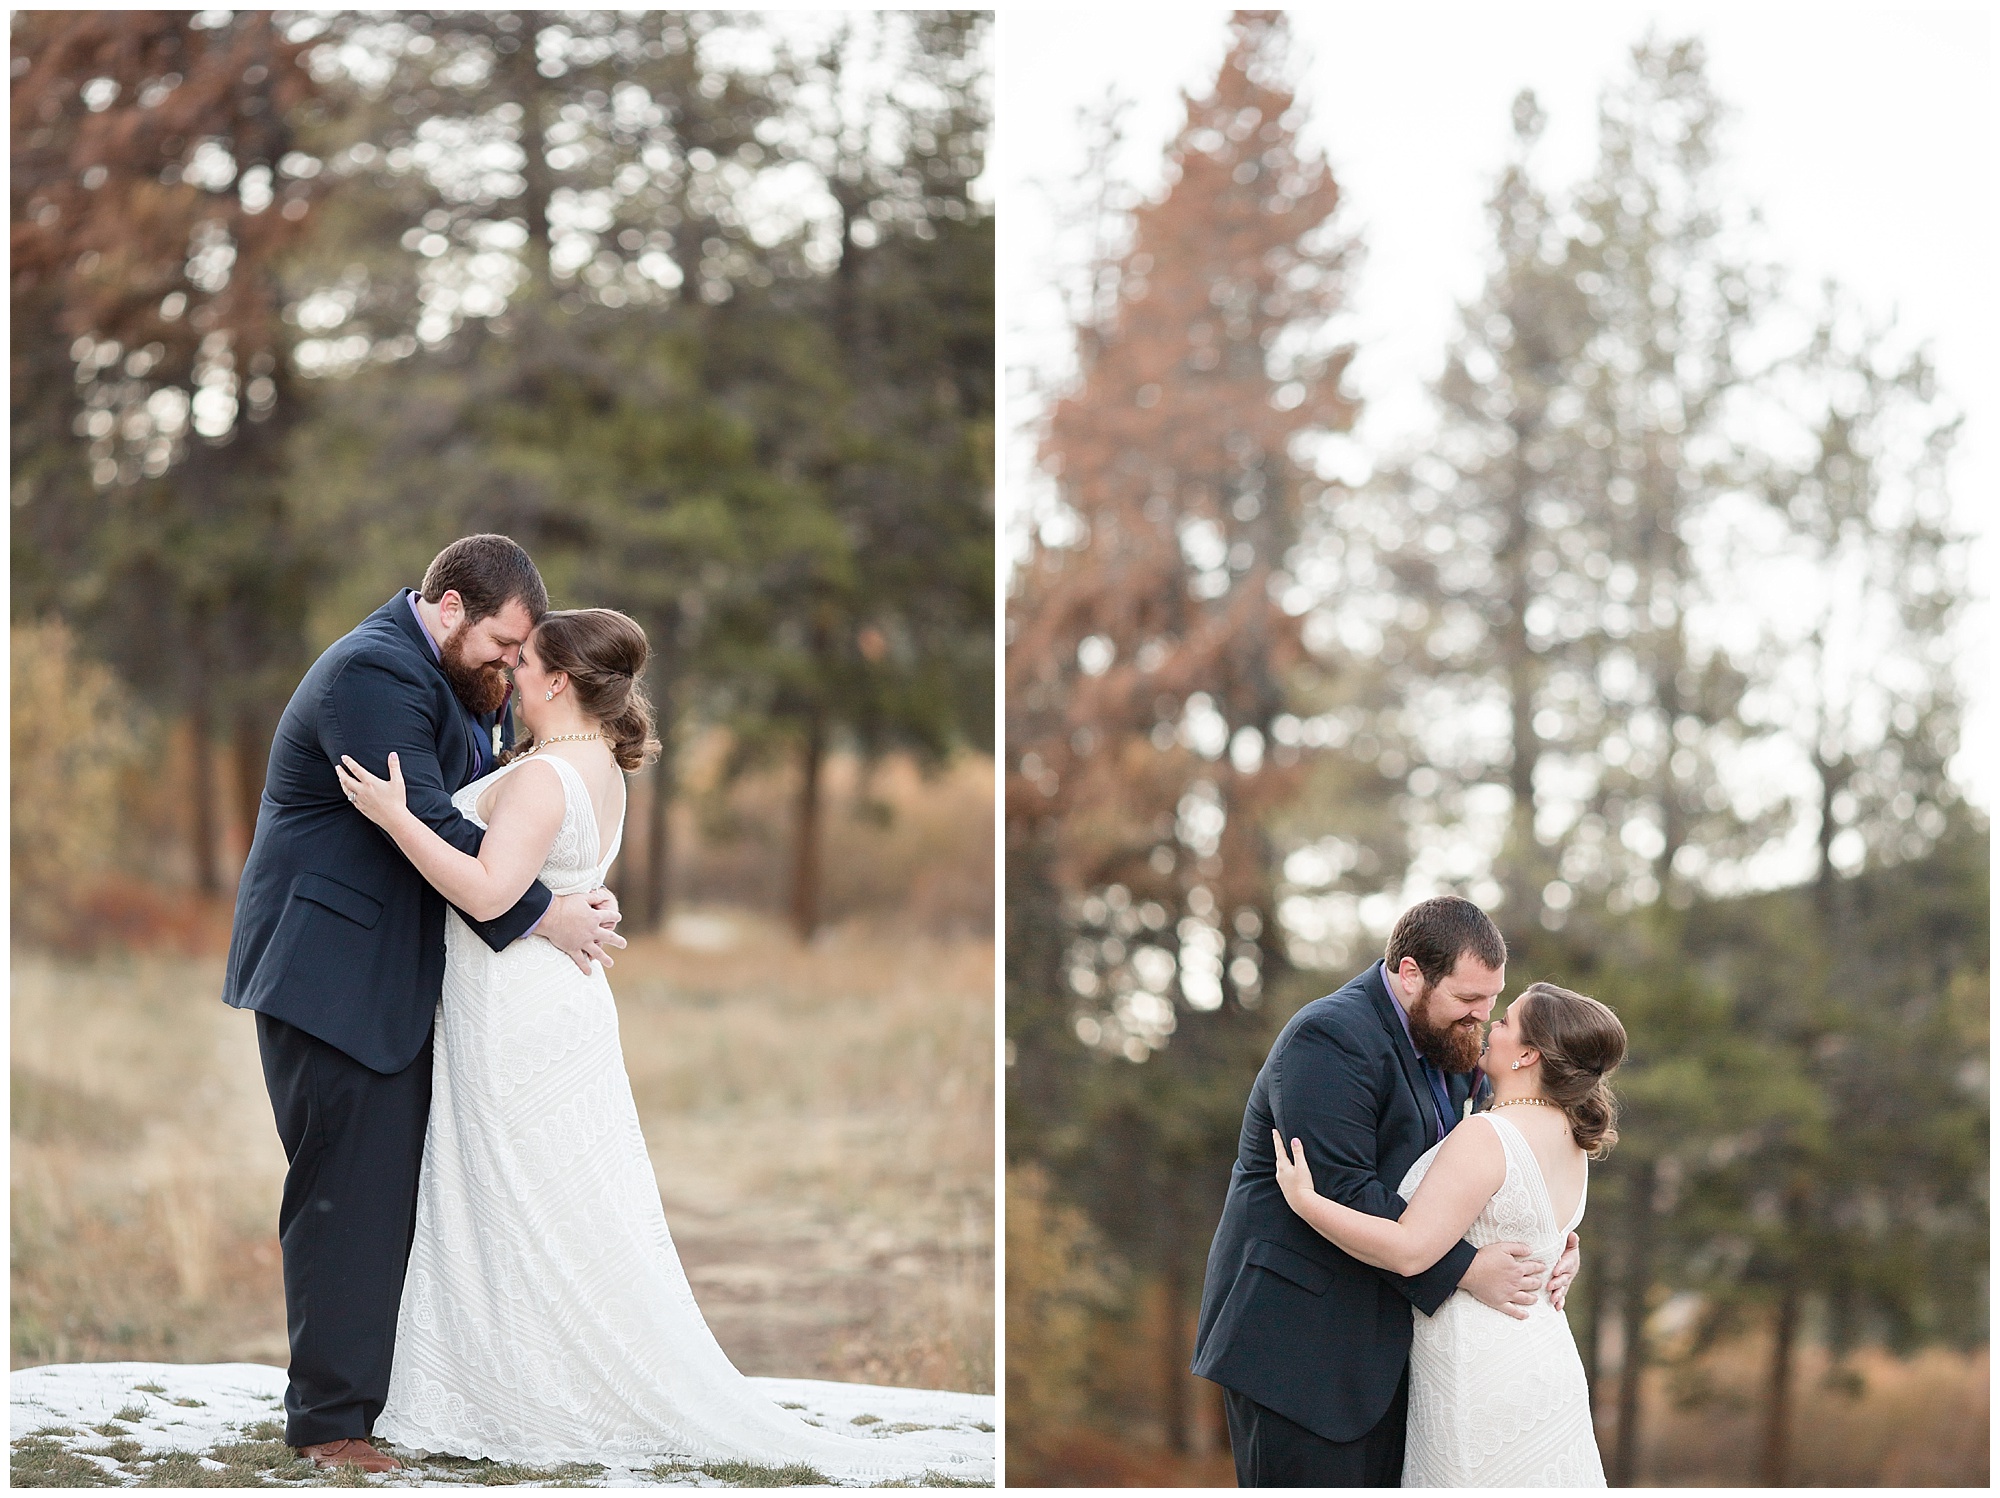 Groom leans in for a kiss from his bride at their Fall Breckenridge elopement.